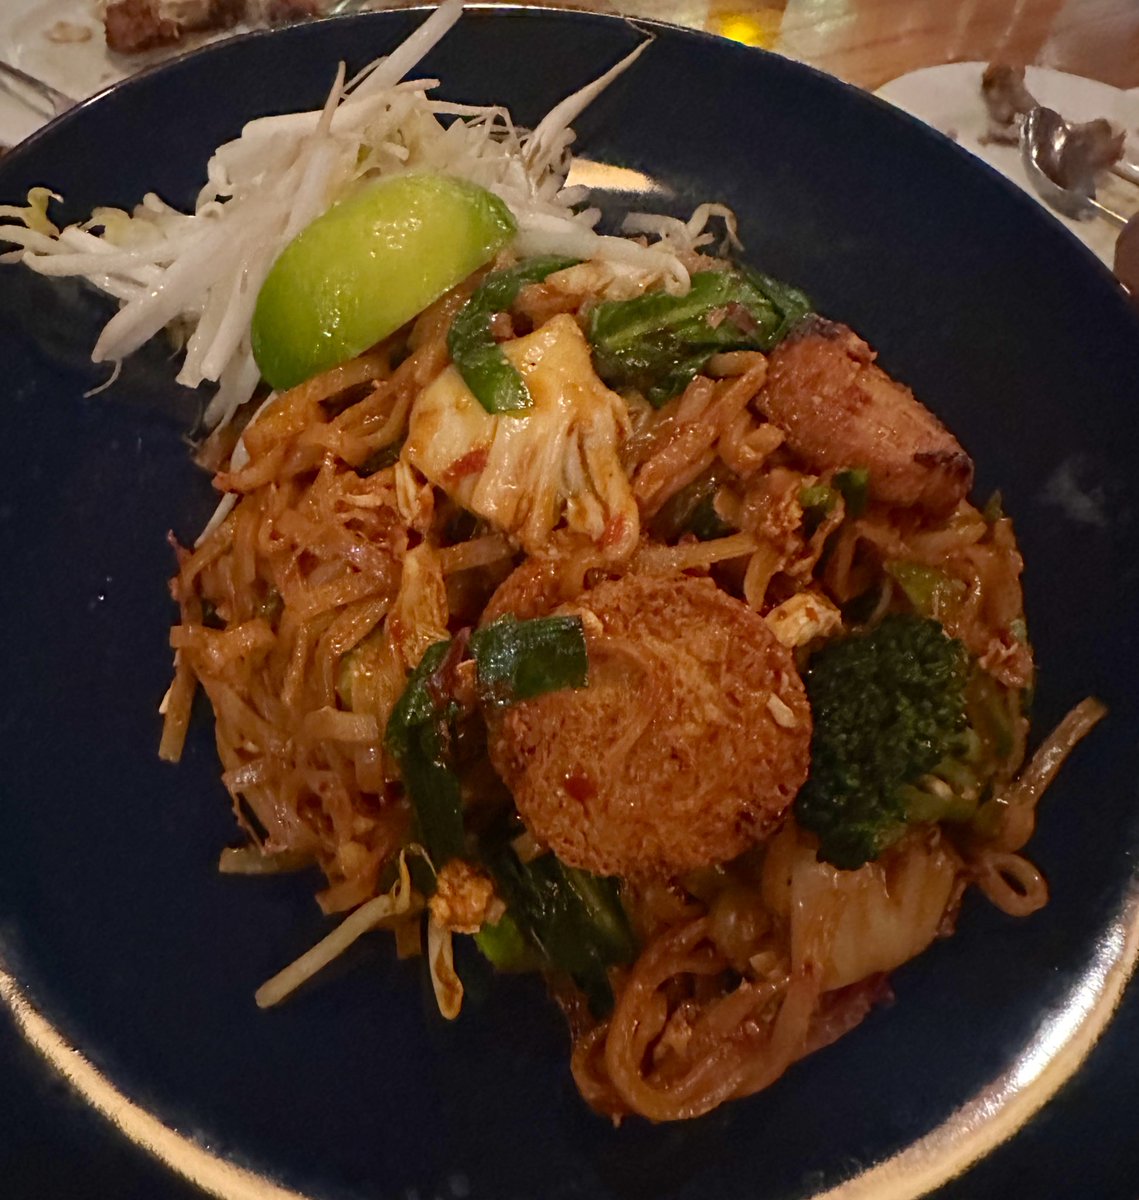 I was debating whether to share this.  This was a terrible expensive meal in NYC.

The ‘tamarind’ chicken wings only tasted of sugar, no tamarind in sight. The Pad Thai looked fine but had zero flavor. I was so sad! 😔

Have you had such bad meals? 

#nycfoodie #thaifood #badfood